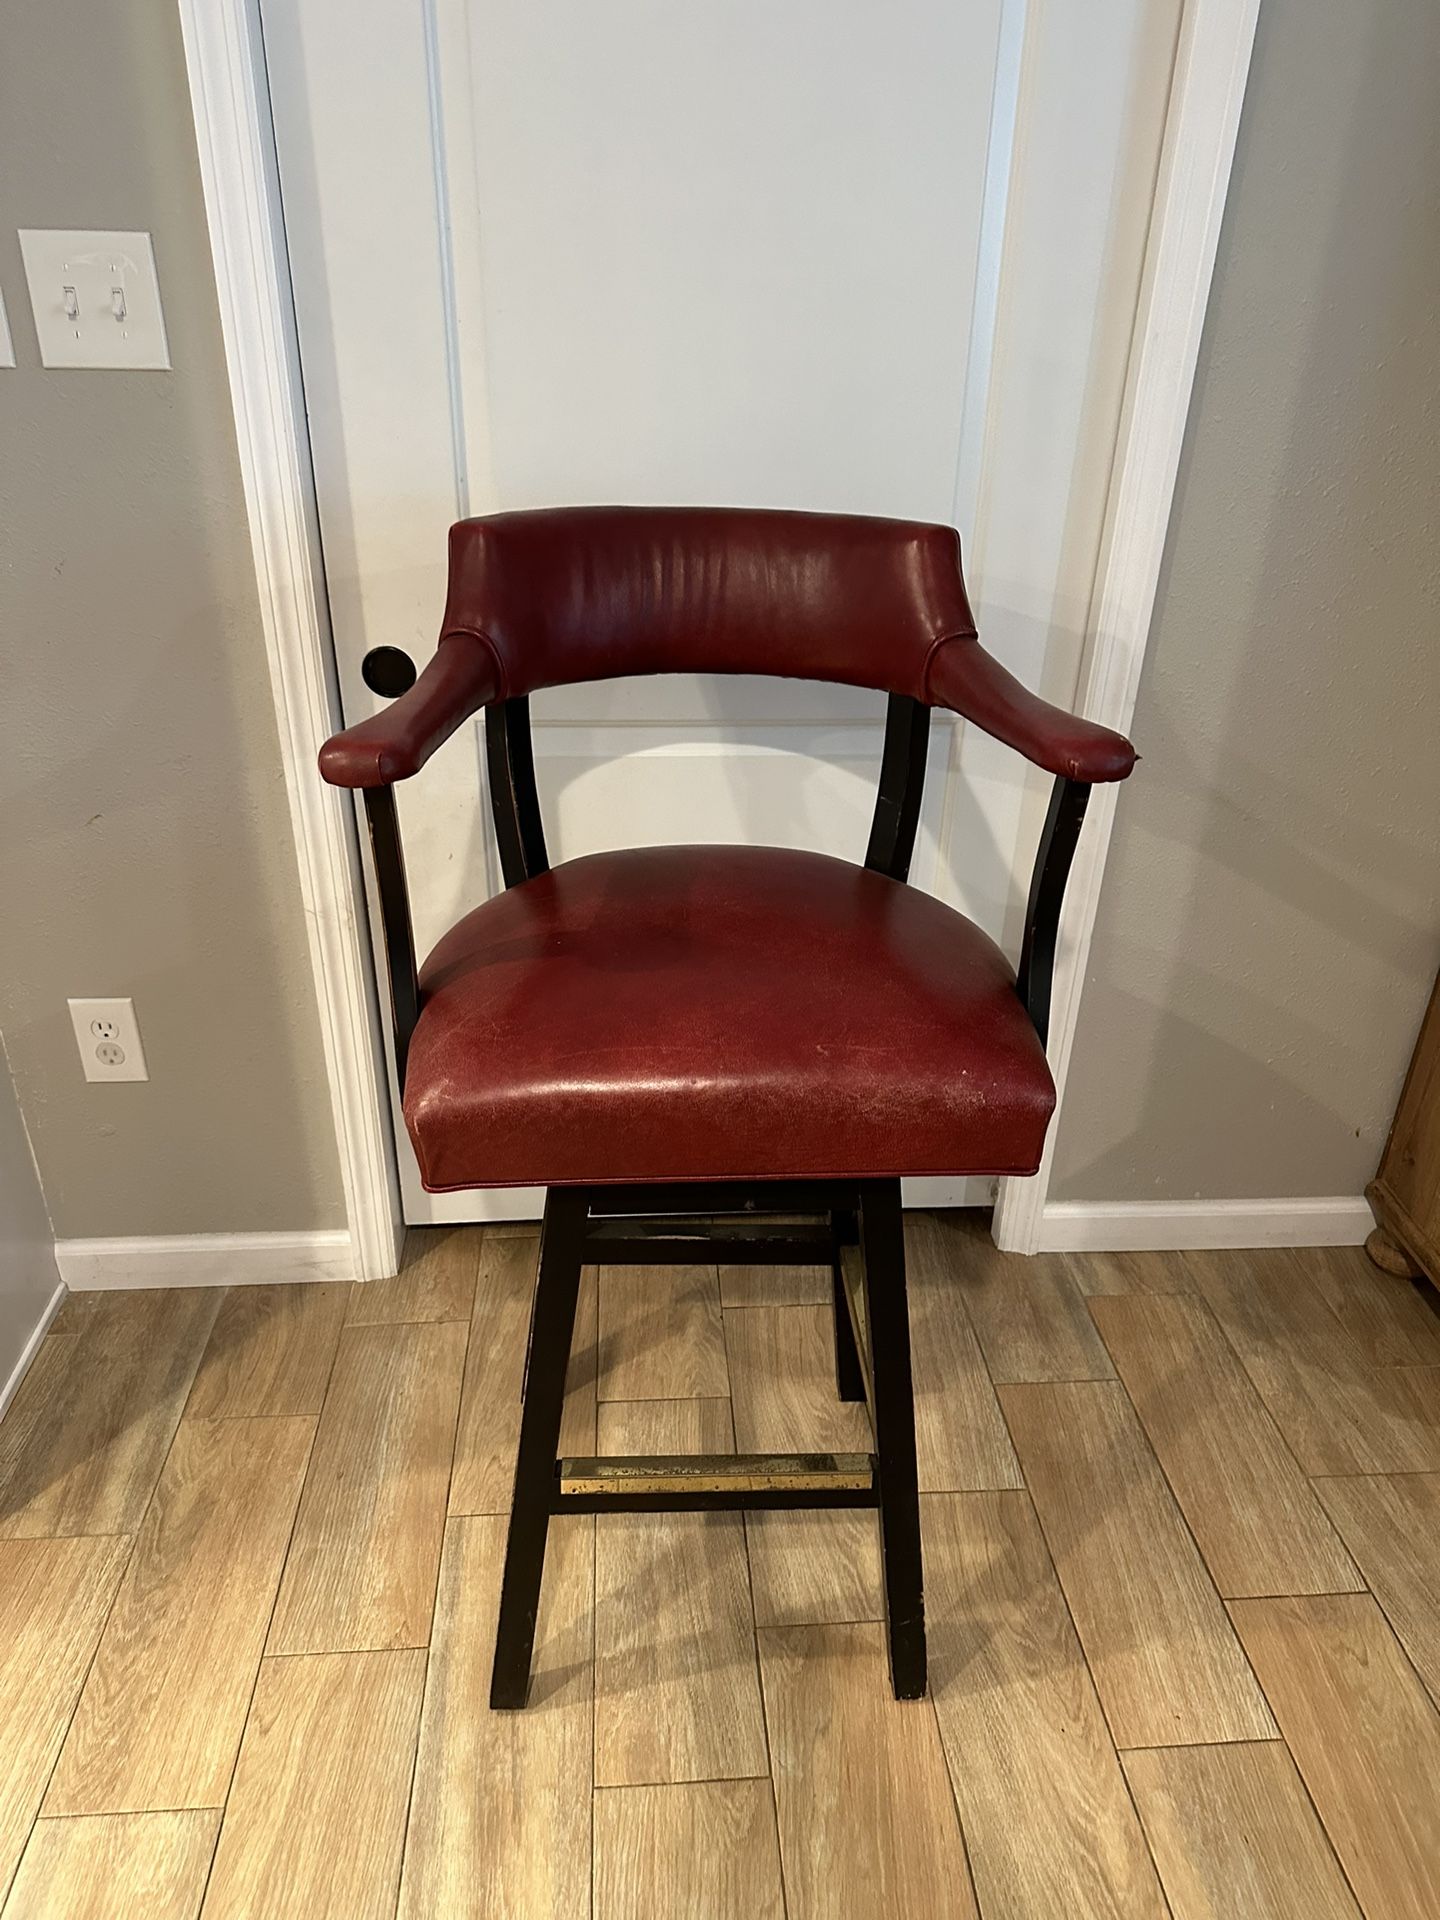 Red Leather Bar Stool